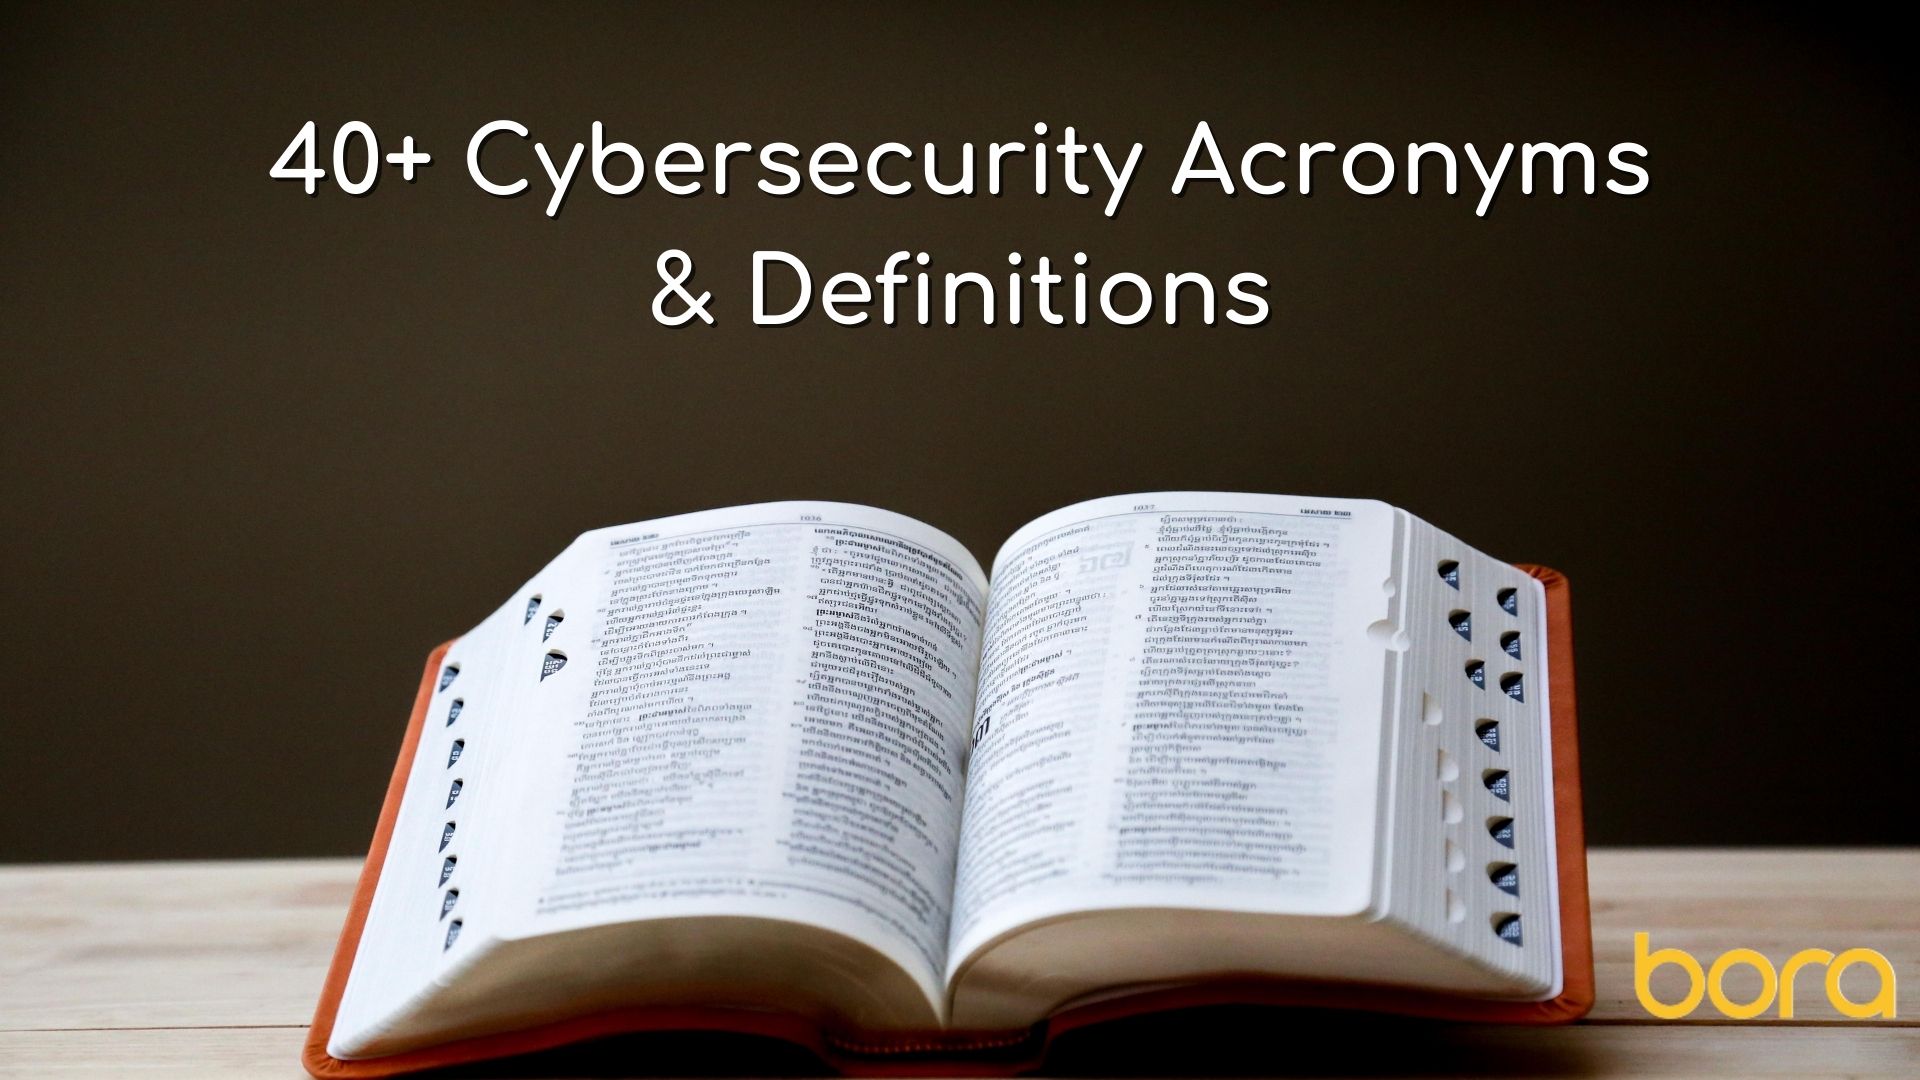 40+ Cybersecurity Acronyms & Definitions